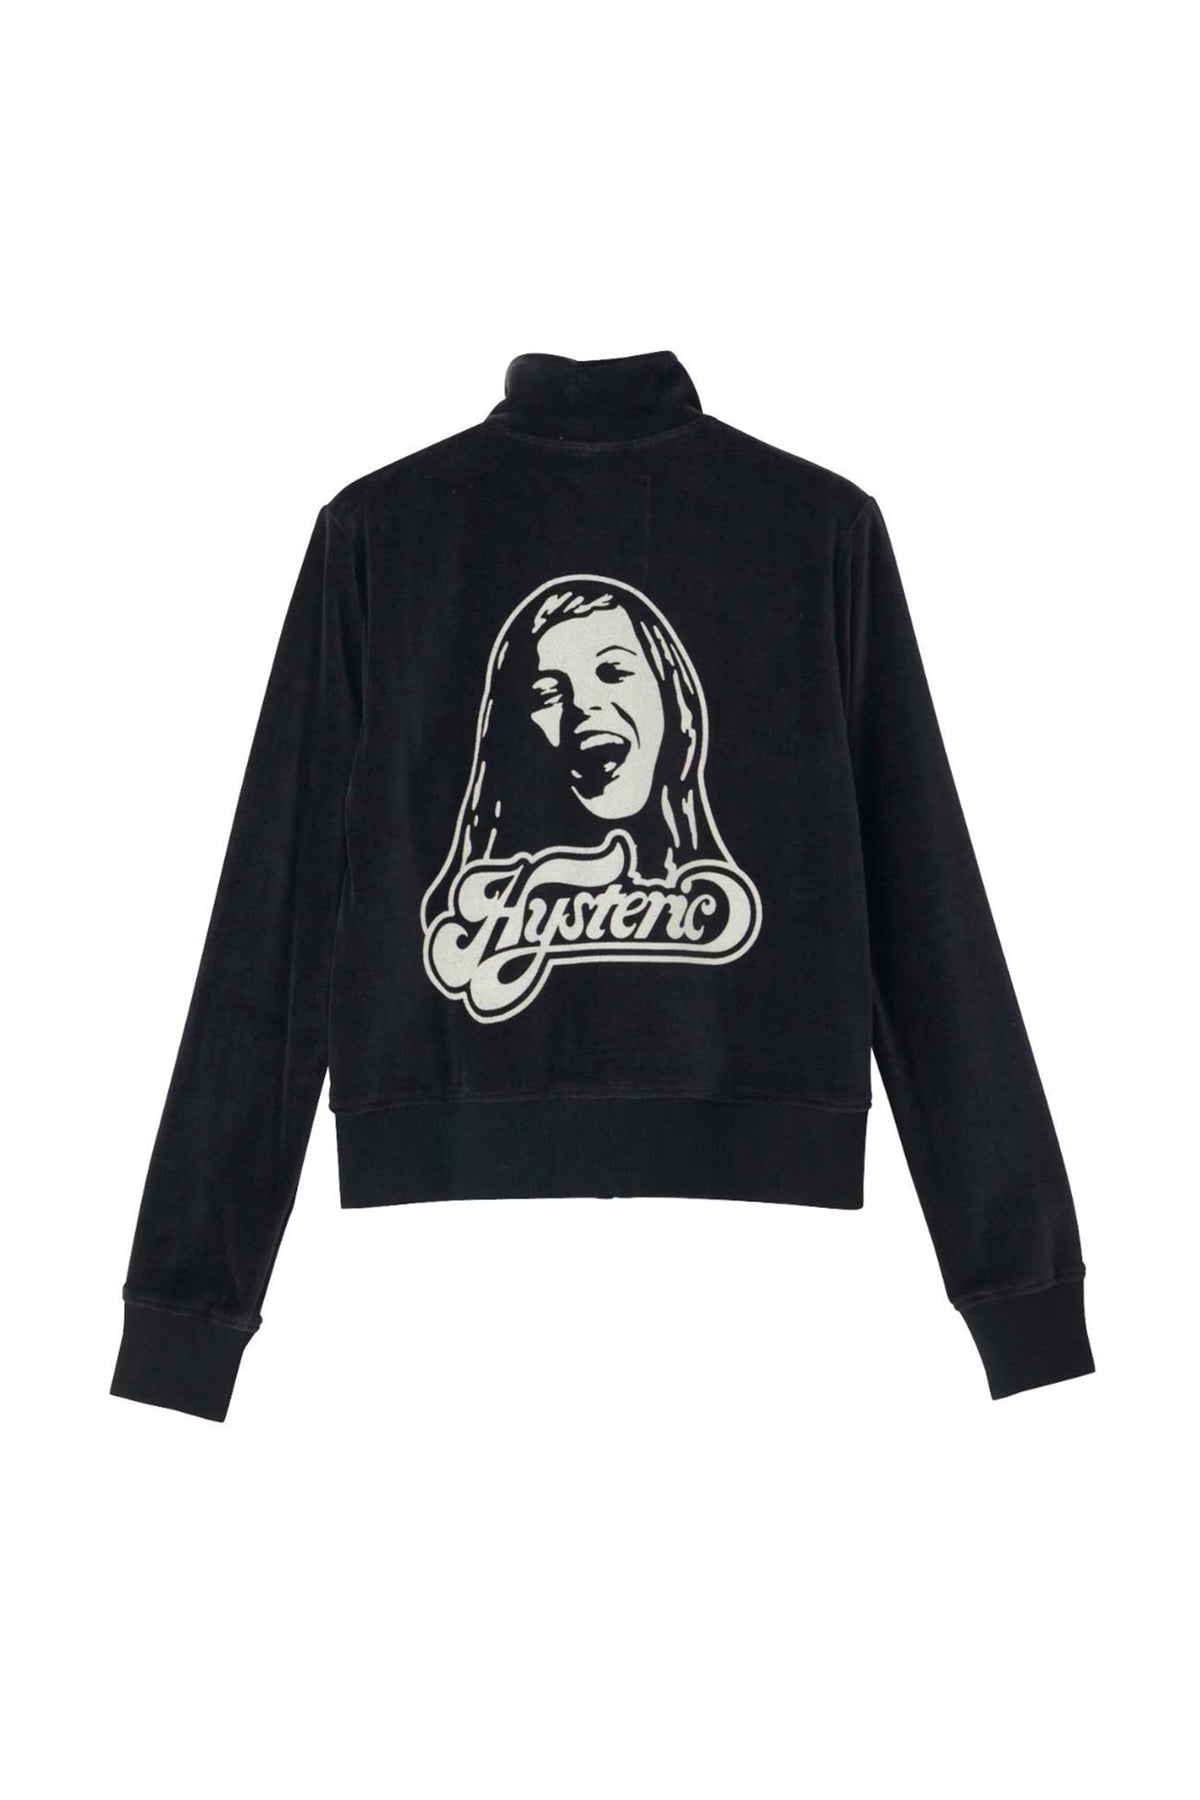 HYSTERIC GLAMOUR CREAMY LOGO TRACK JACKET / BLK